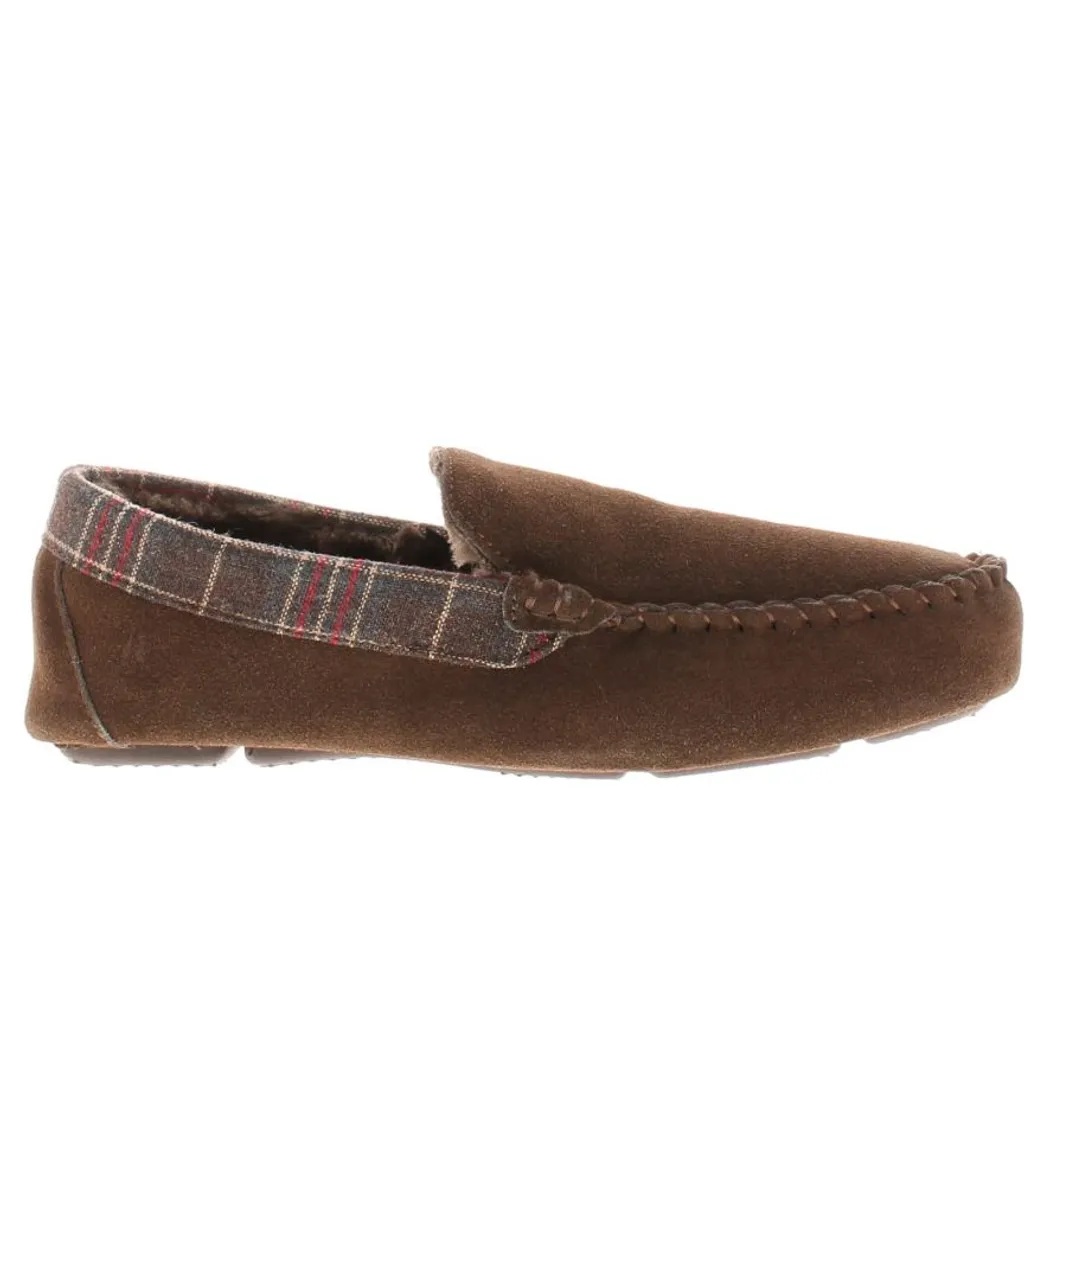 Hush Puppies Mens Moccasin Slippers Andreas Suede Leather brown